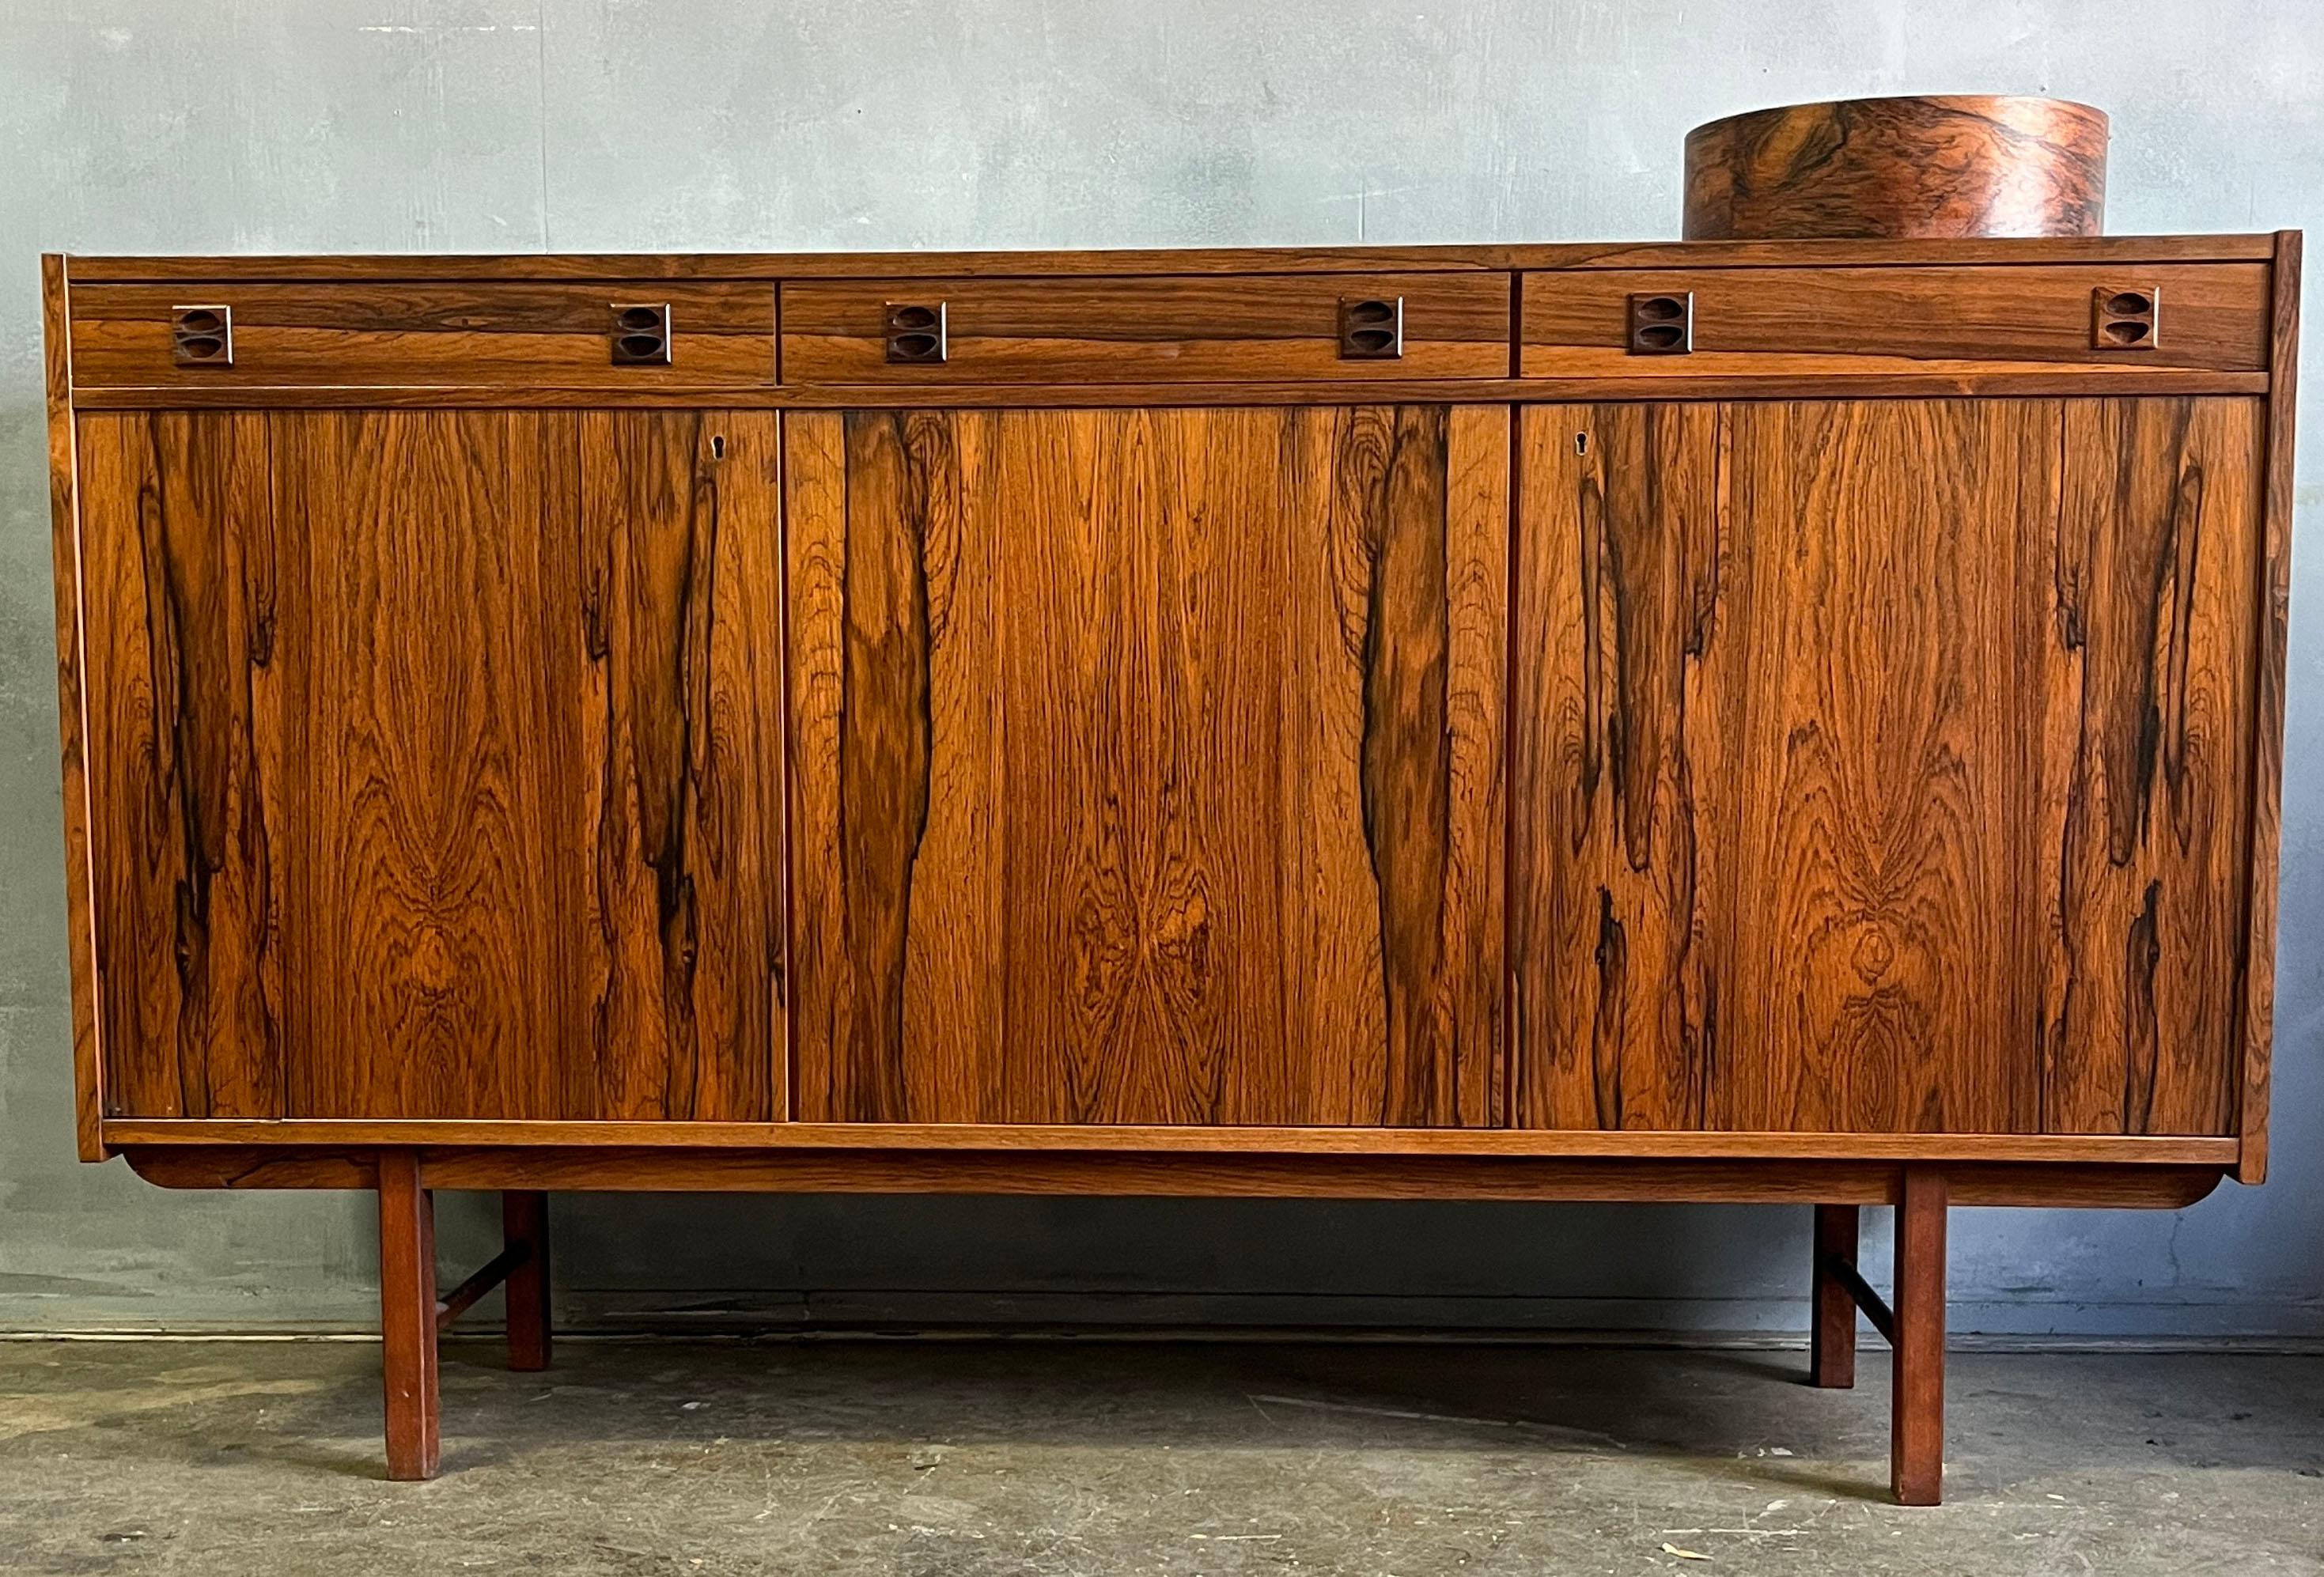 Rare sideboard in rosewood designed by Erik Wörts for Ikea 1960's. One of the most soft after designers and somewhat elusive Erik Worts only designed a few pieces for IKEA and very few of these credenzas were ever made. This Ladoga series was